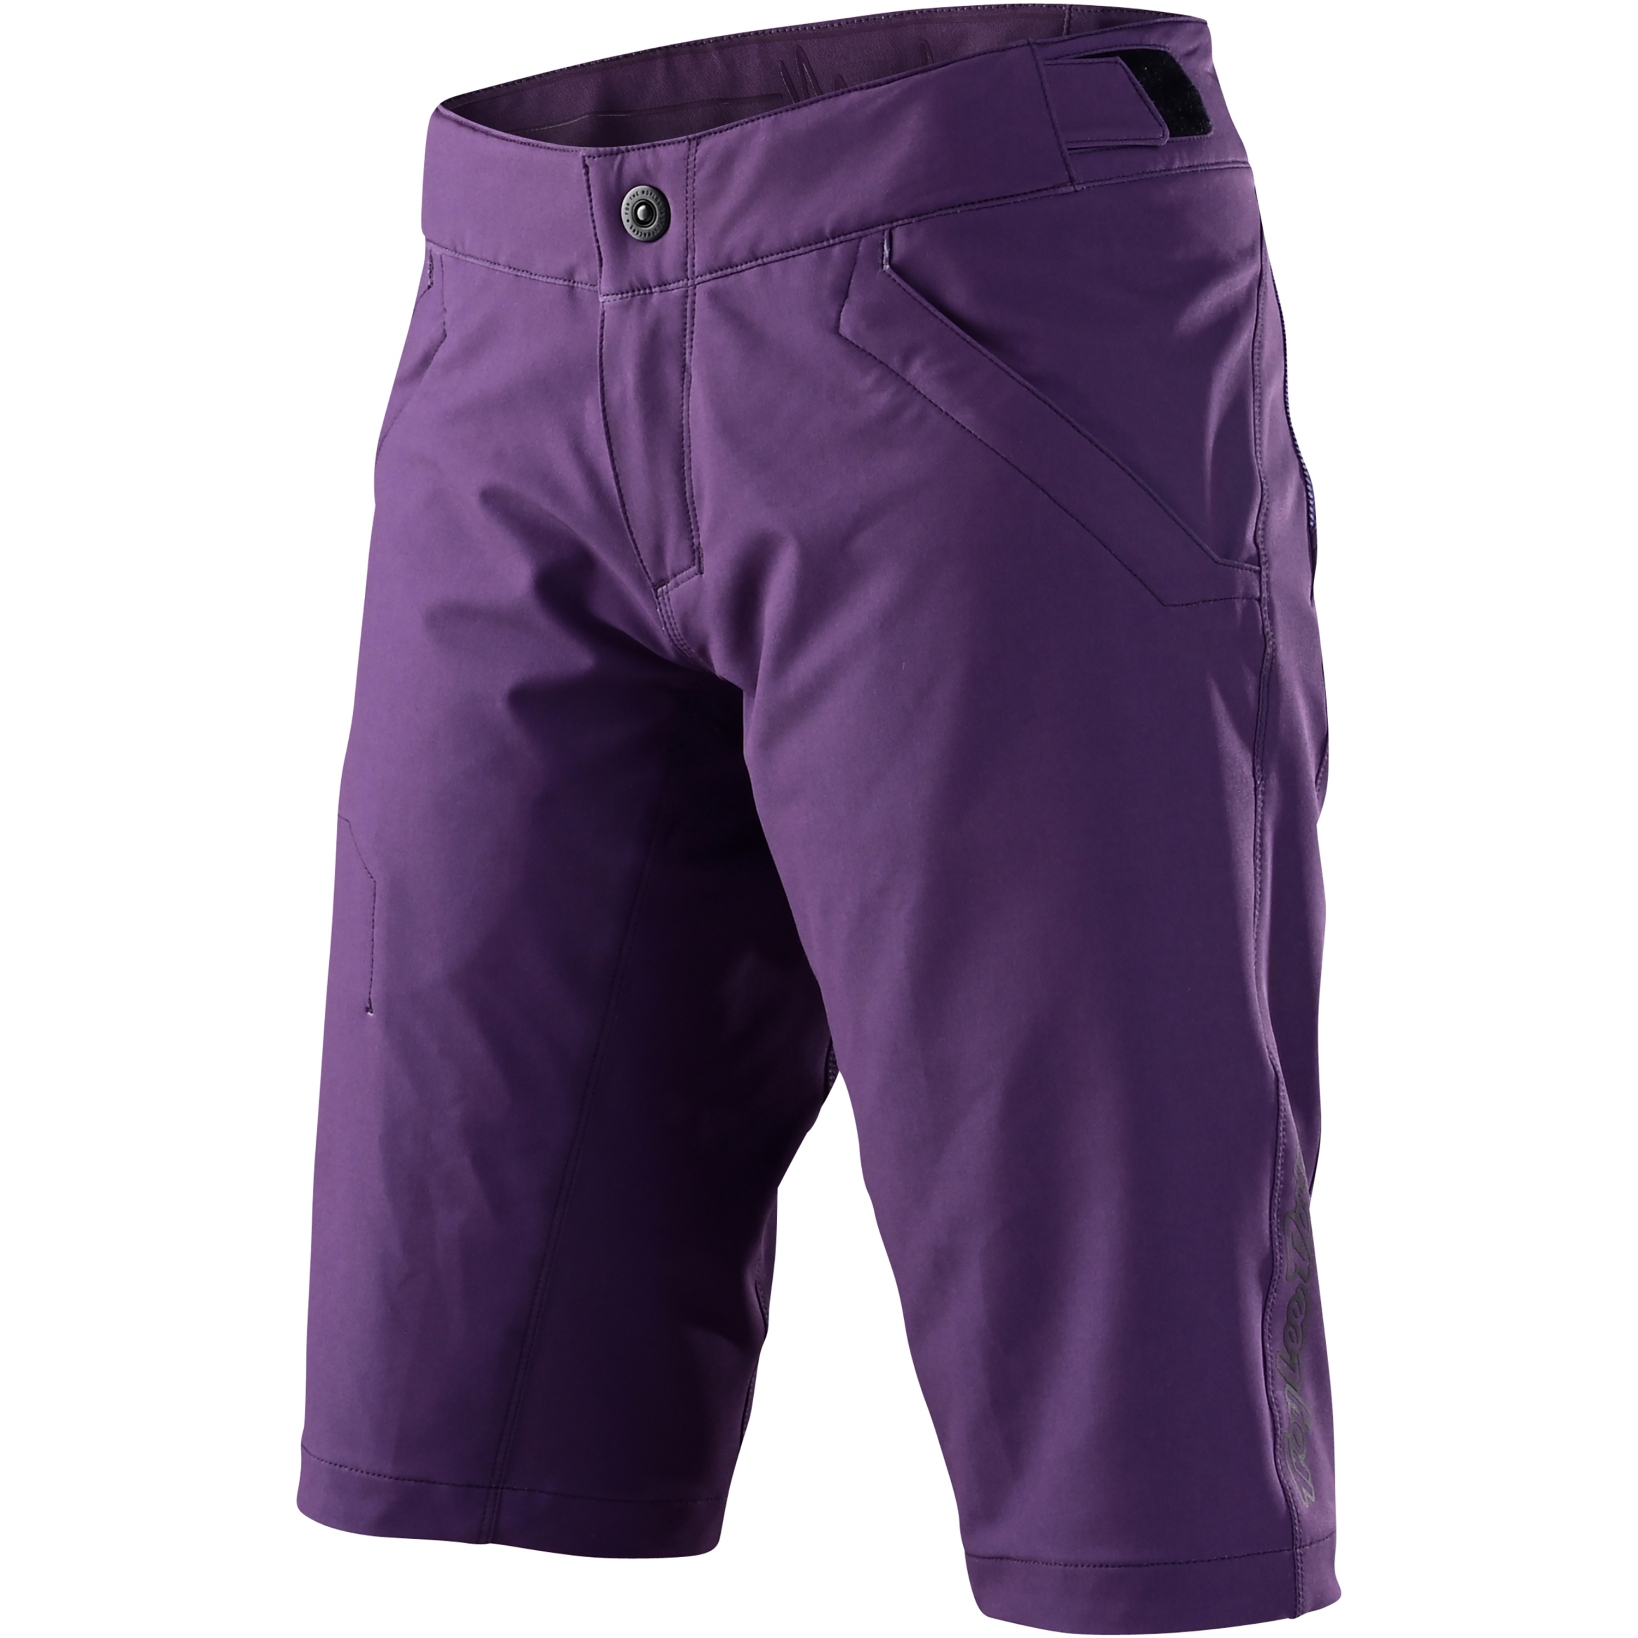 Productfoto van Troy Lee Designs Mischief Shell Women&#039;s Shorts - Solid Orchid